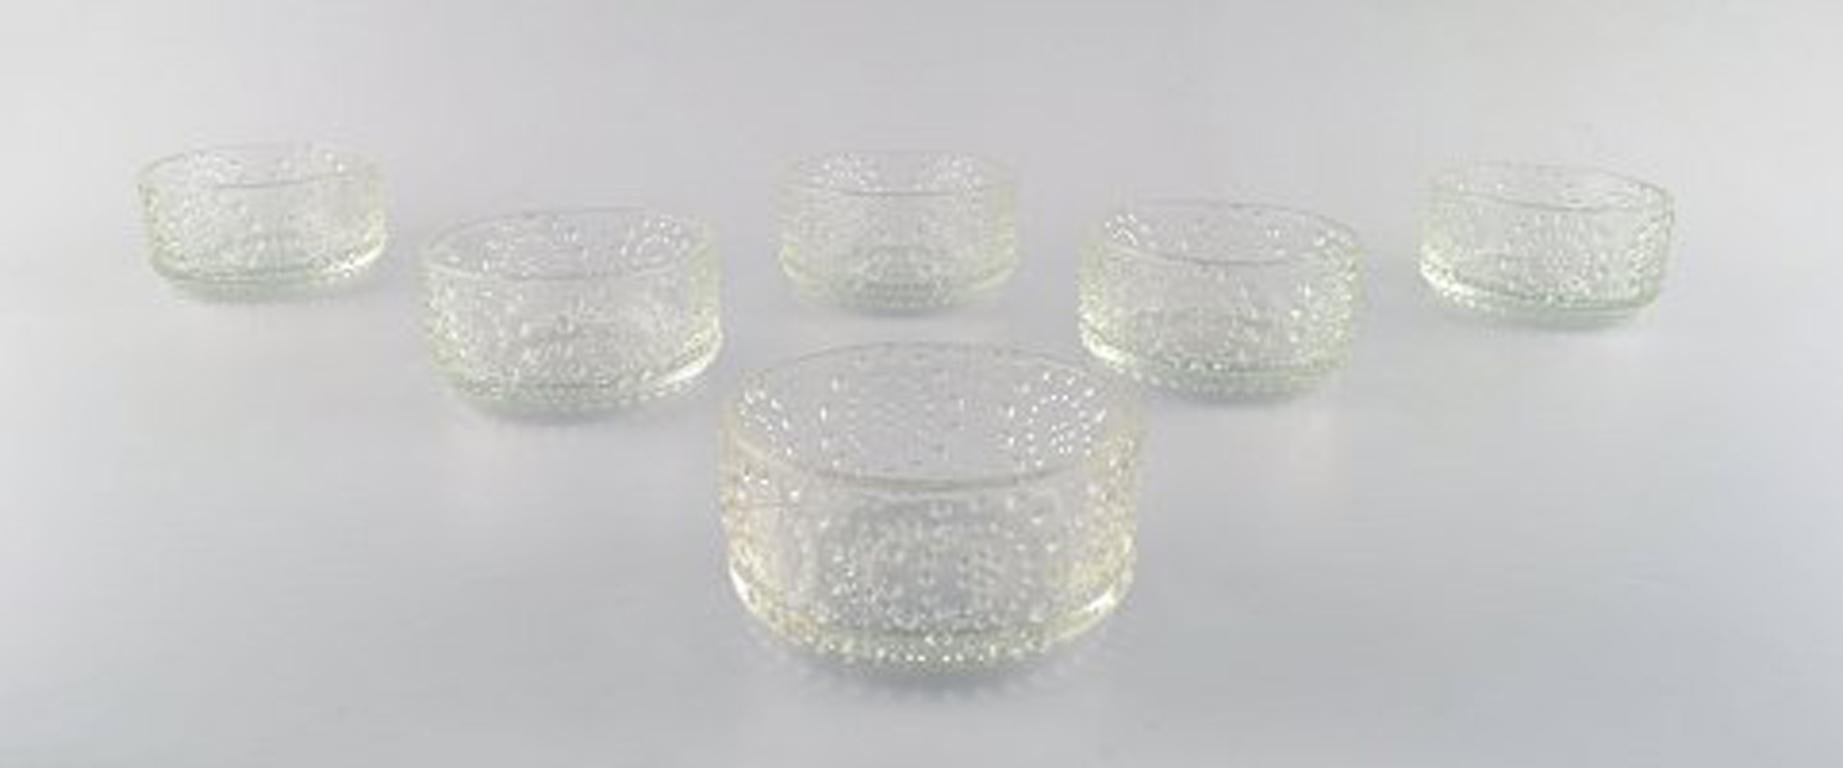 Nanny Still. Grapponia. Six bowls of clear glass art.
Finnish design 1960-1970s.
Measures 9.5 cm x 5 cm.
In perfect condition.